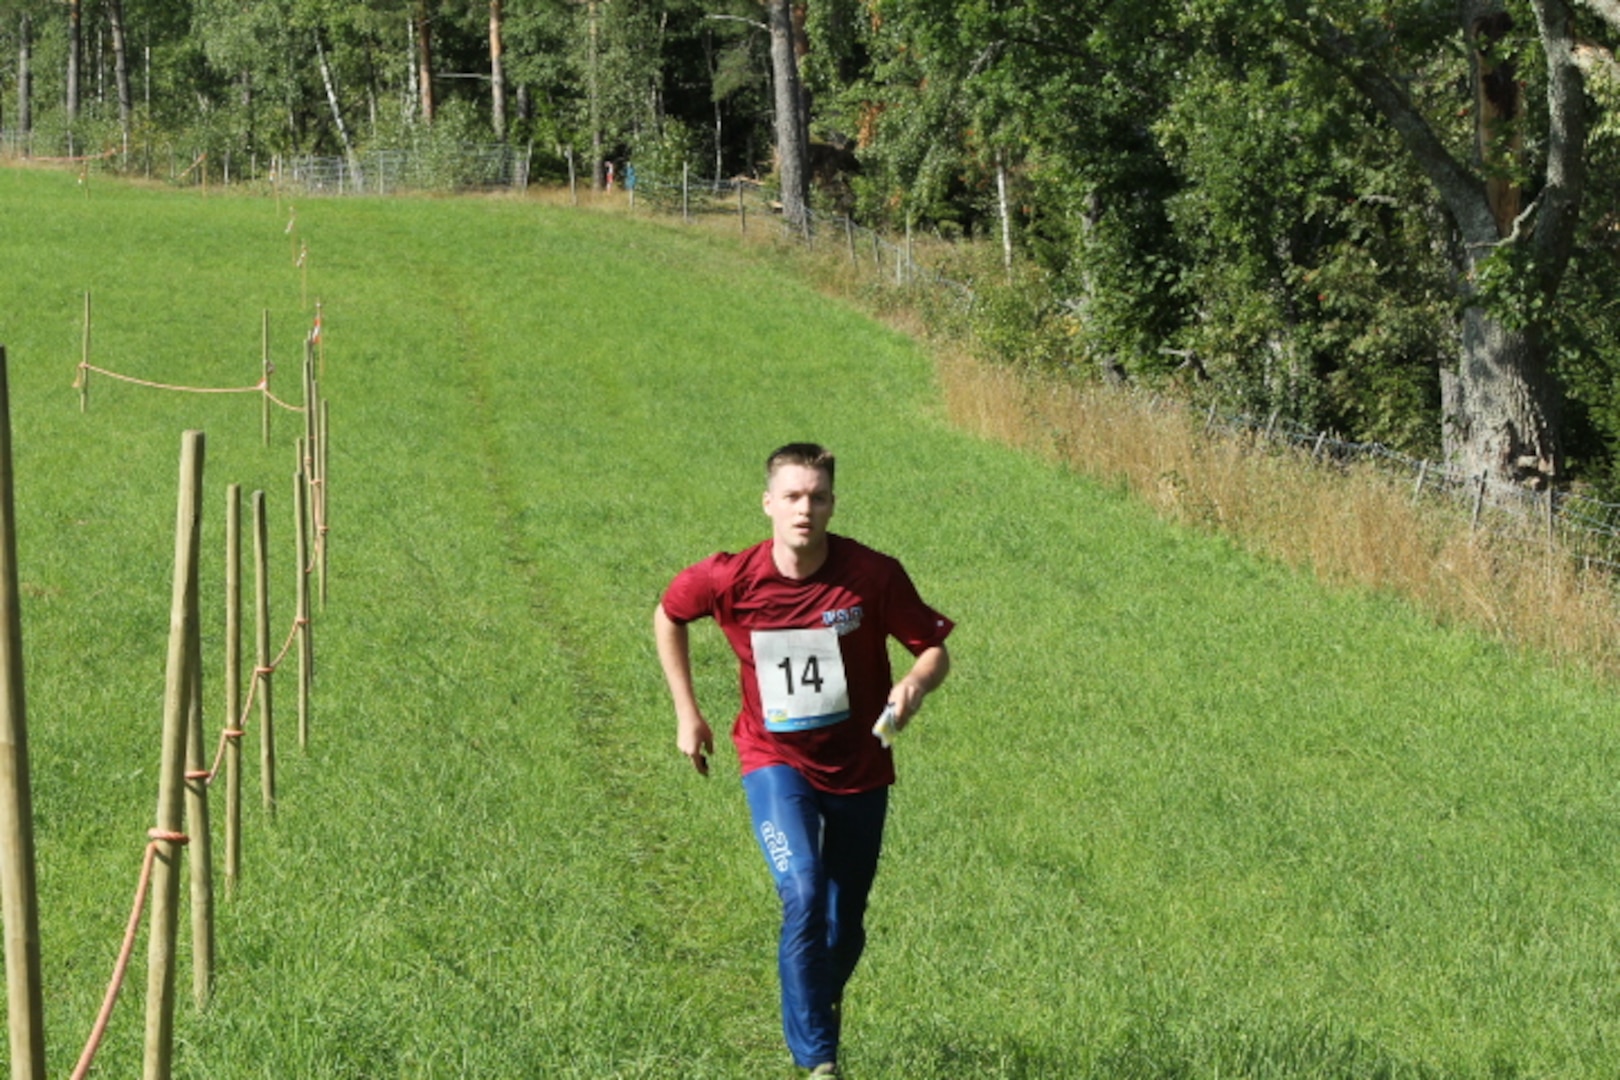 Maj Joseph Burkhead (USAF) at the 2013 CISM World Orienteering Military Championship hosted by the Swedish Armed Forces in Eksjo, Sweden from 26 August to 1 September.